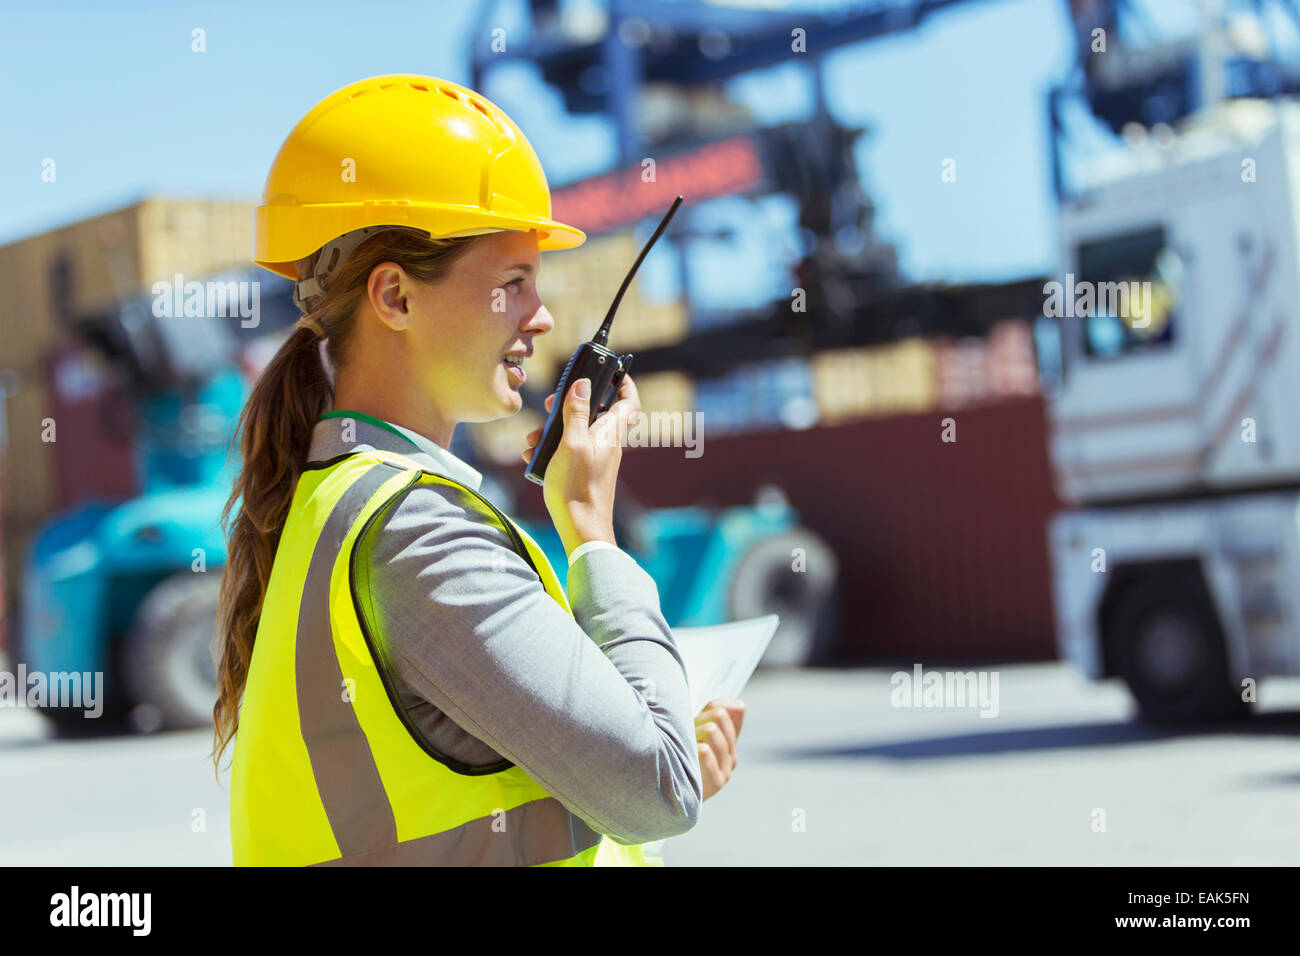 Businesswoman using walkie-talkie near cargo containers and trucks Stock Photo